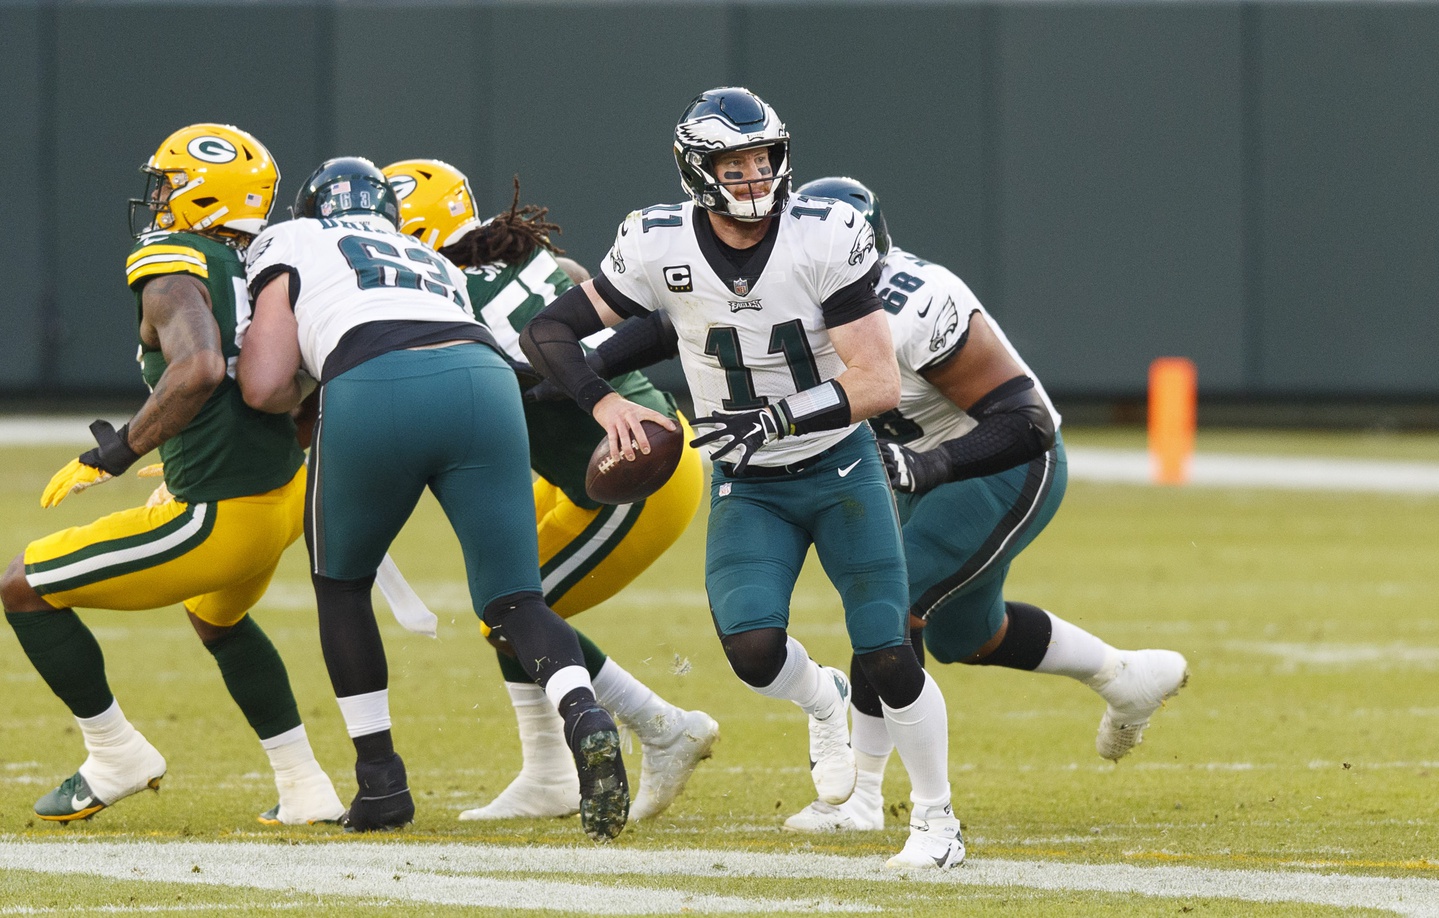 Howie Roseman recruiting help from Zach Ertz to try to keep Carson Wentz